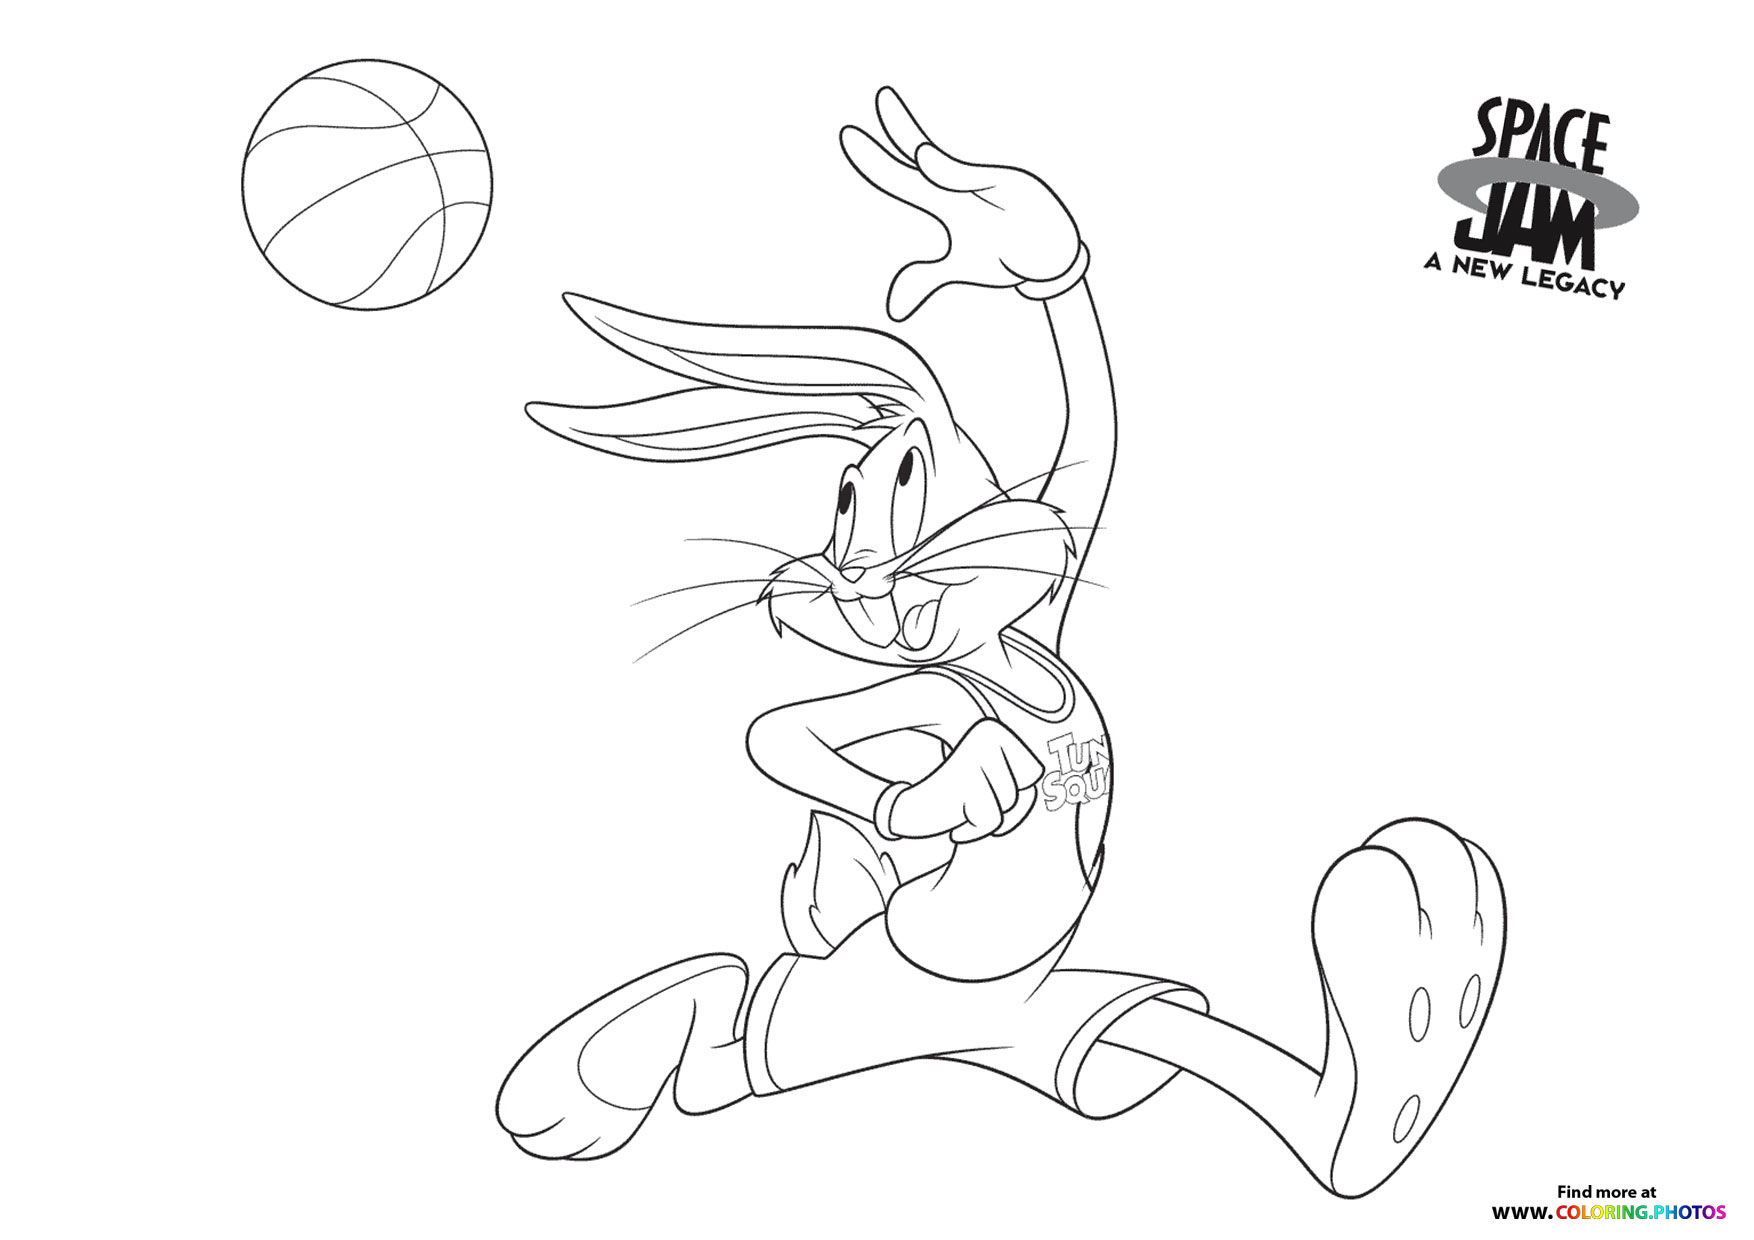 Bugs Bunny playing basketball - Space Jam: A new legacy - Coloring Pages  for kids